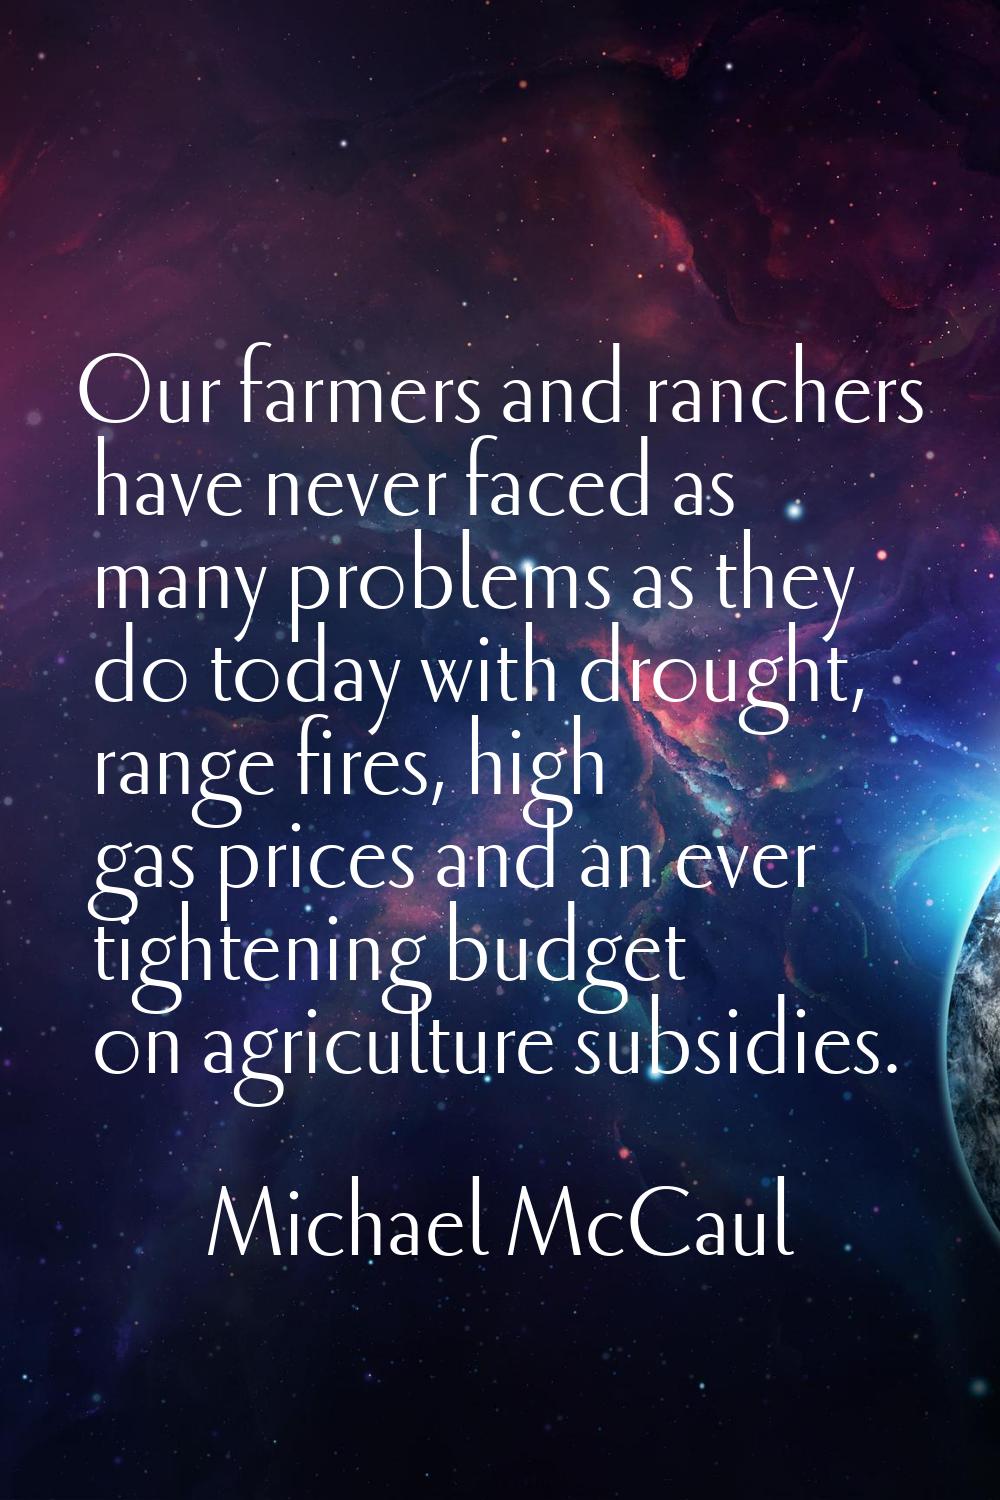 Our farmers and ranchers have never faced as many problems as they do today with drought, range fir